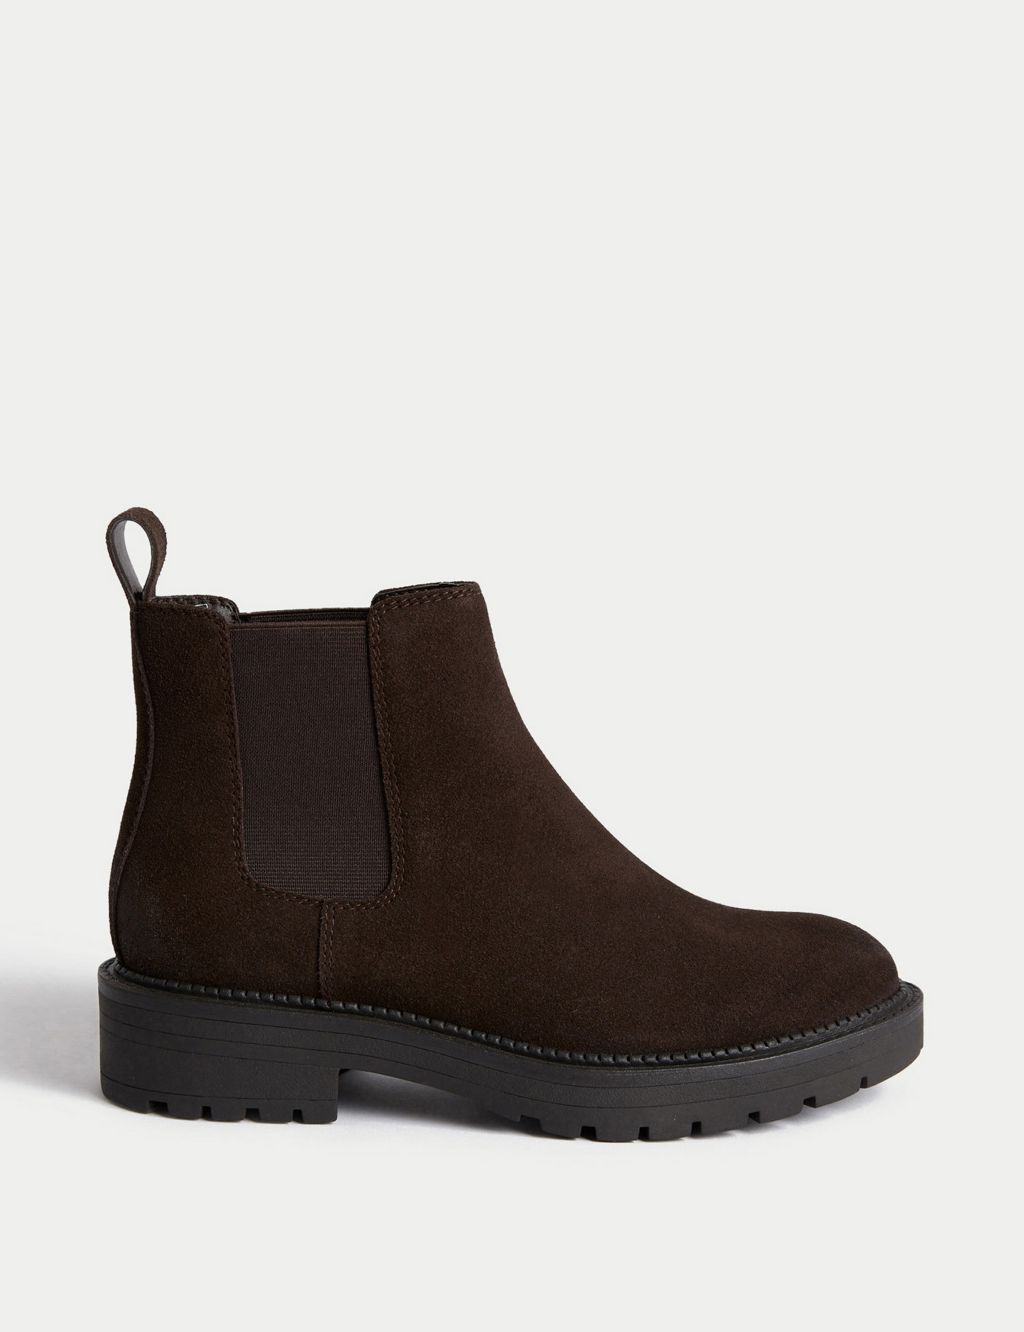 Wide Fit Suede Chelsea Boots image 1